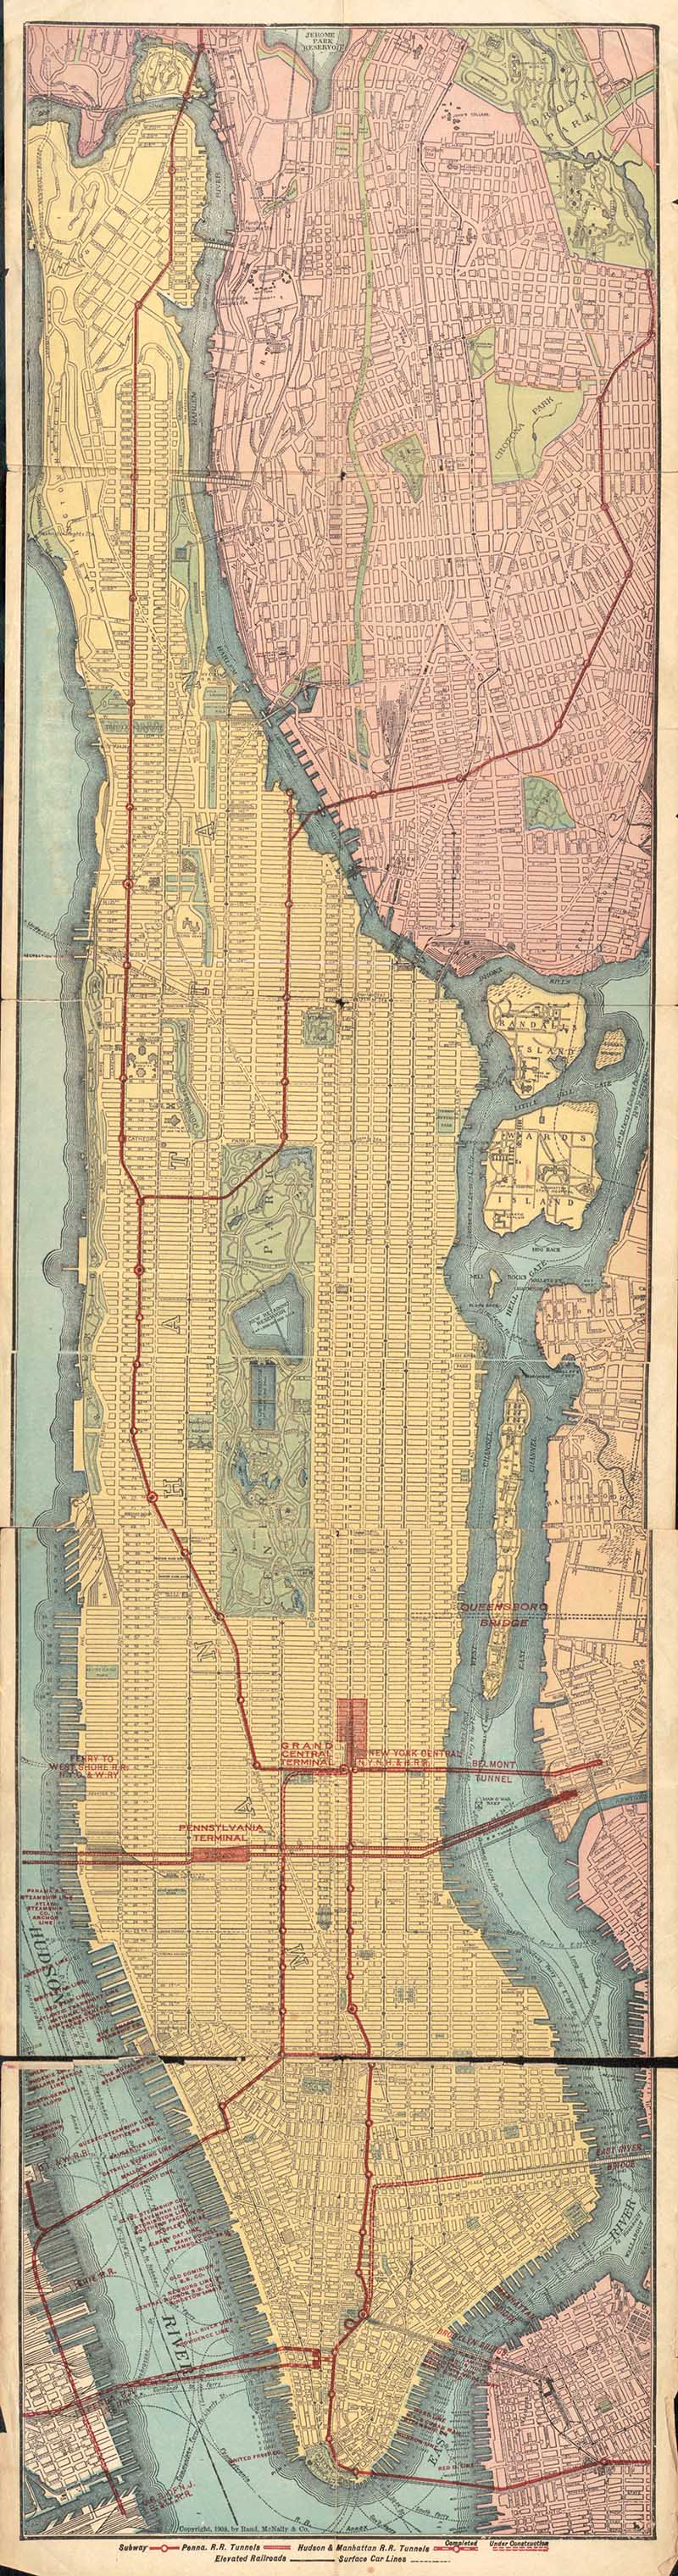 Rapid_transit_map_of_Manhattan_and_adjacent_districts_of_New_York_City